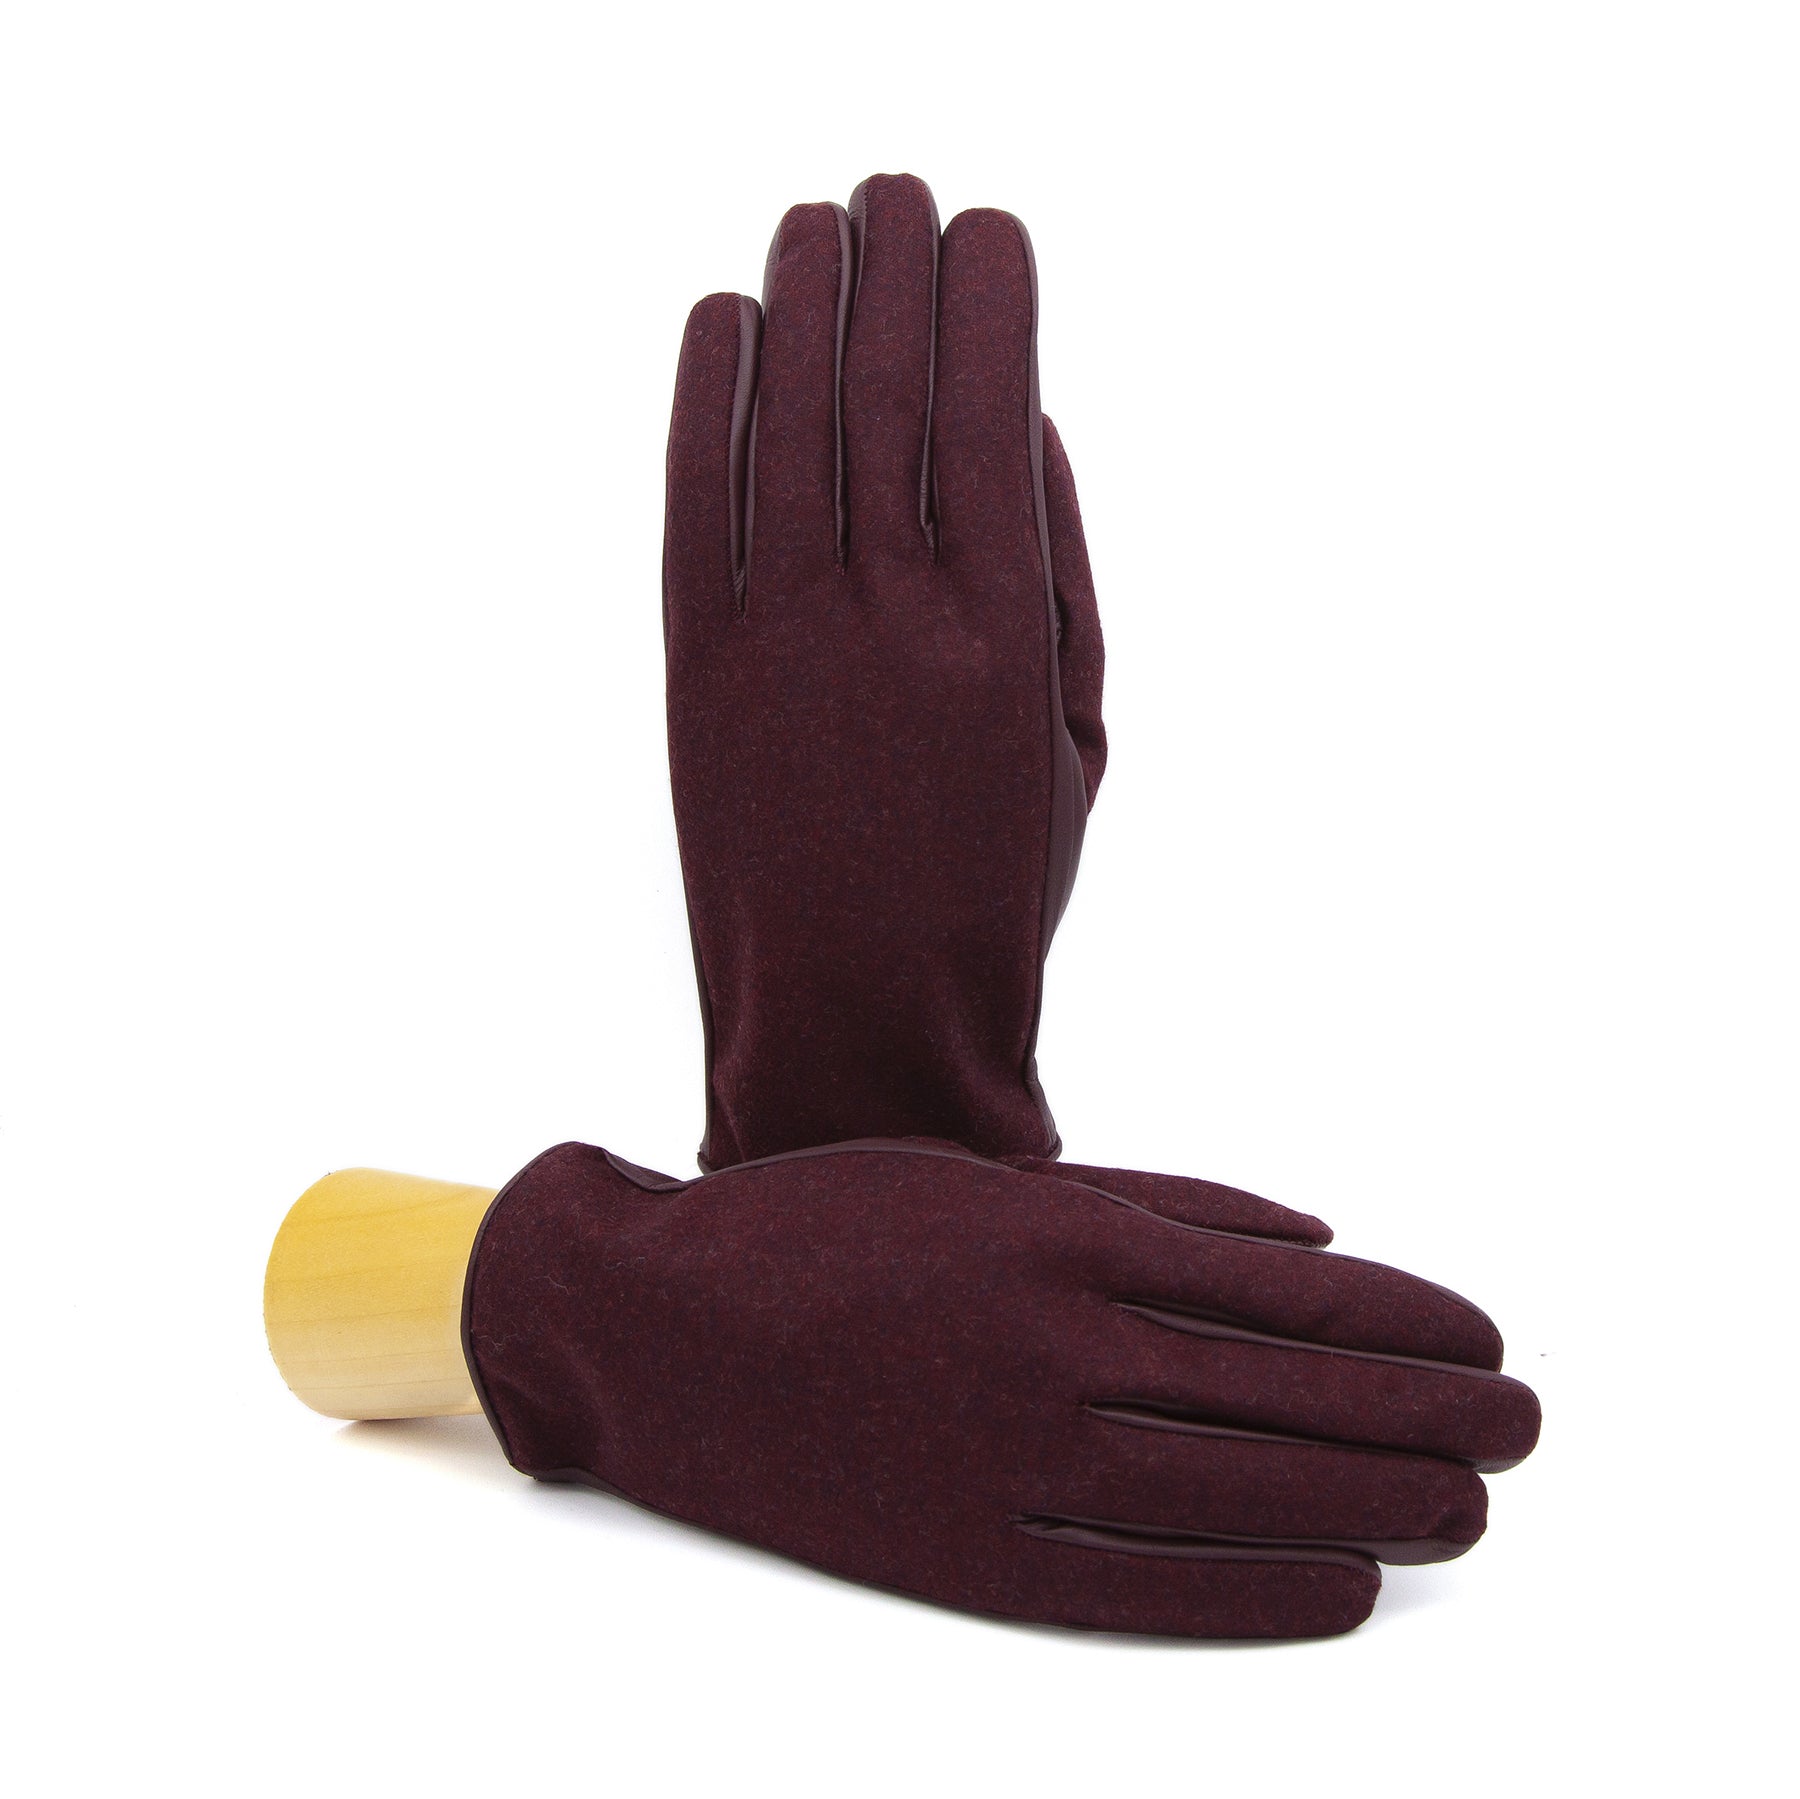 Men's burgundy nappa touch leather gloves and Holland&Sherry wool top